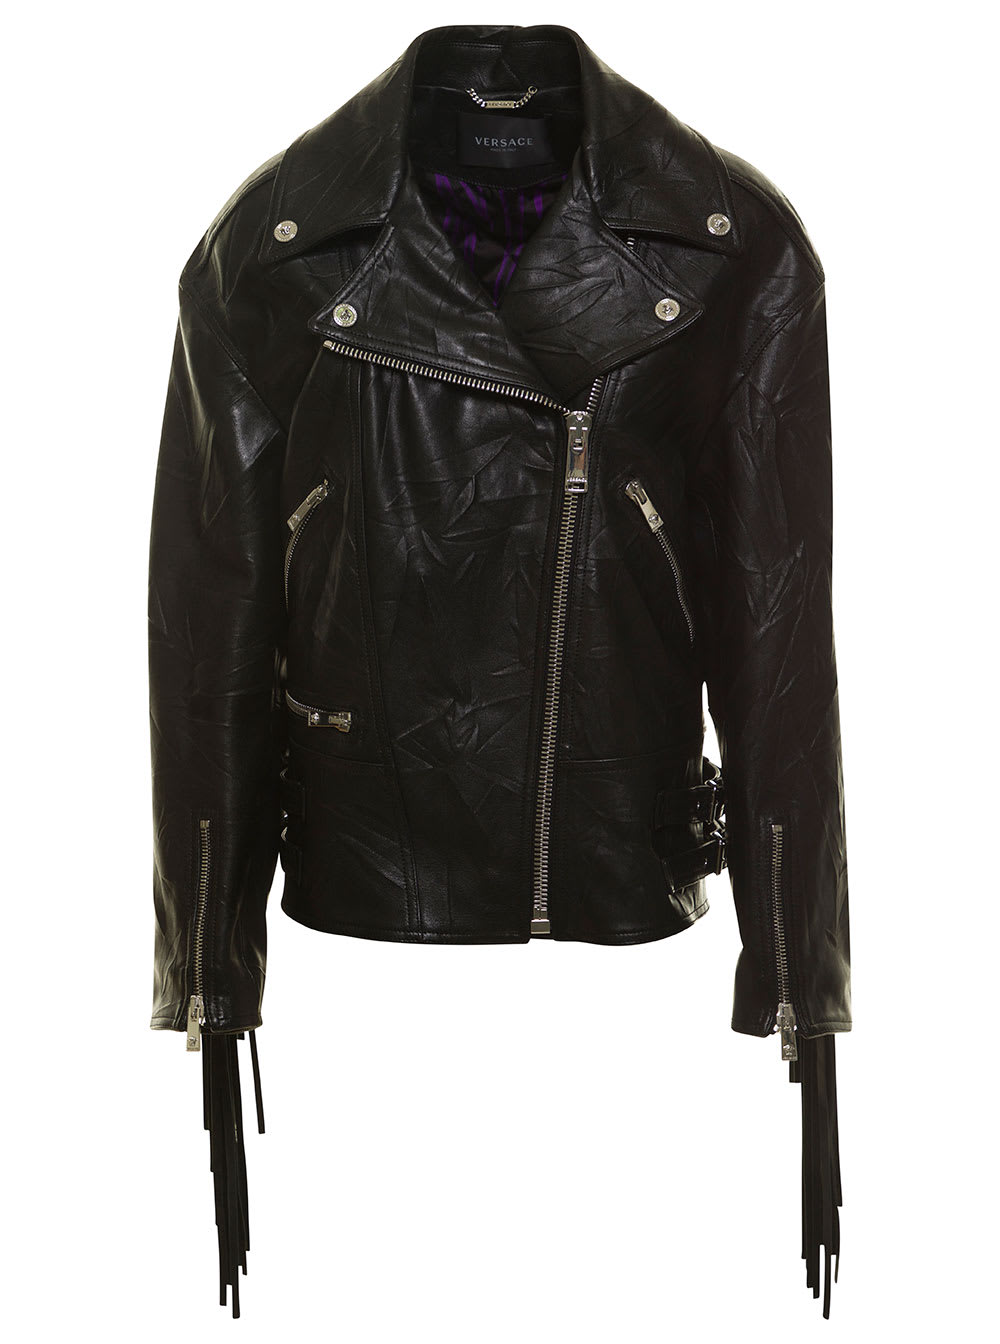 VERSACE BLACK BKER JACKET WITH FRINGES IN LEATHER WOMAN